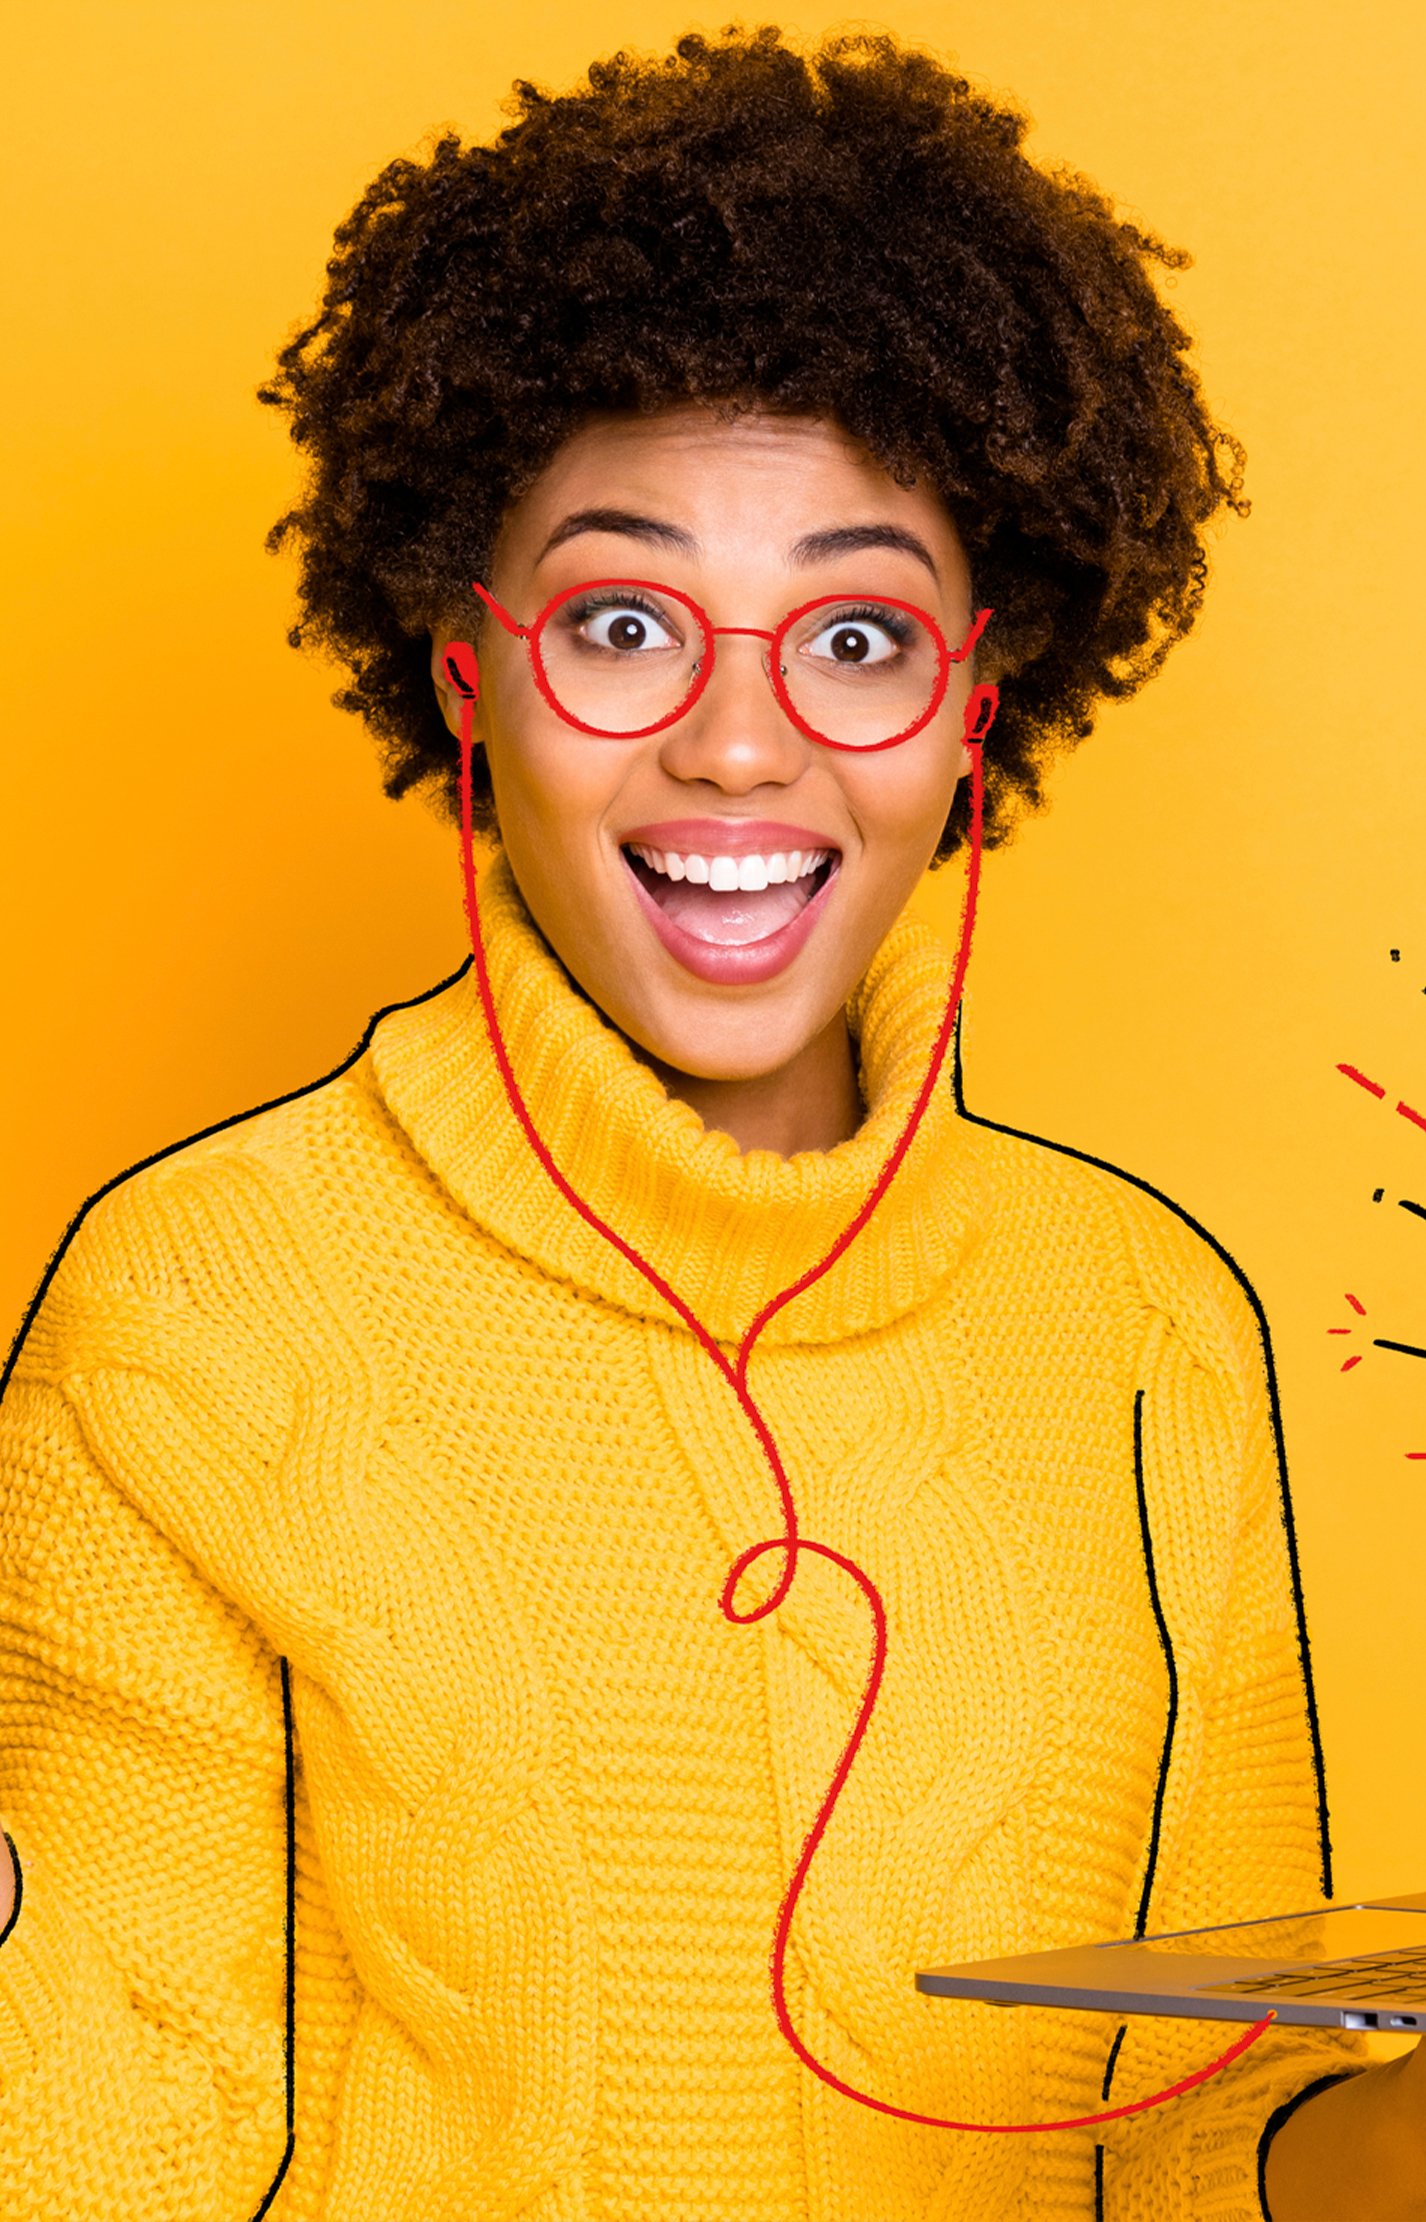 Image of a woman with laptop, looking exciting with yellow sweater and red glasses